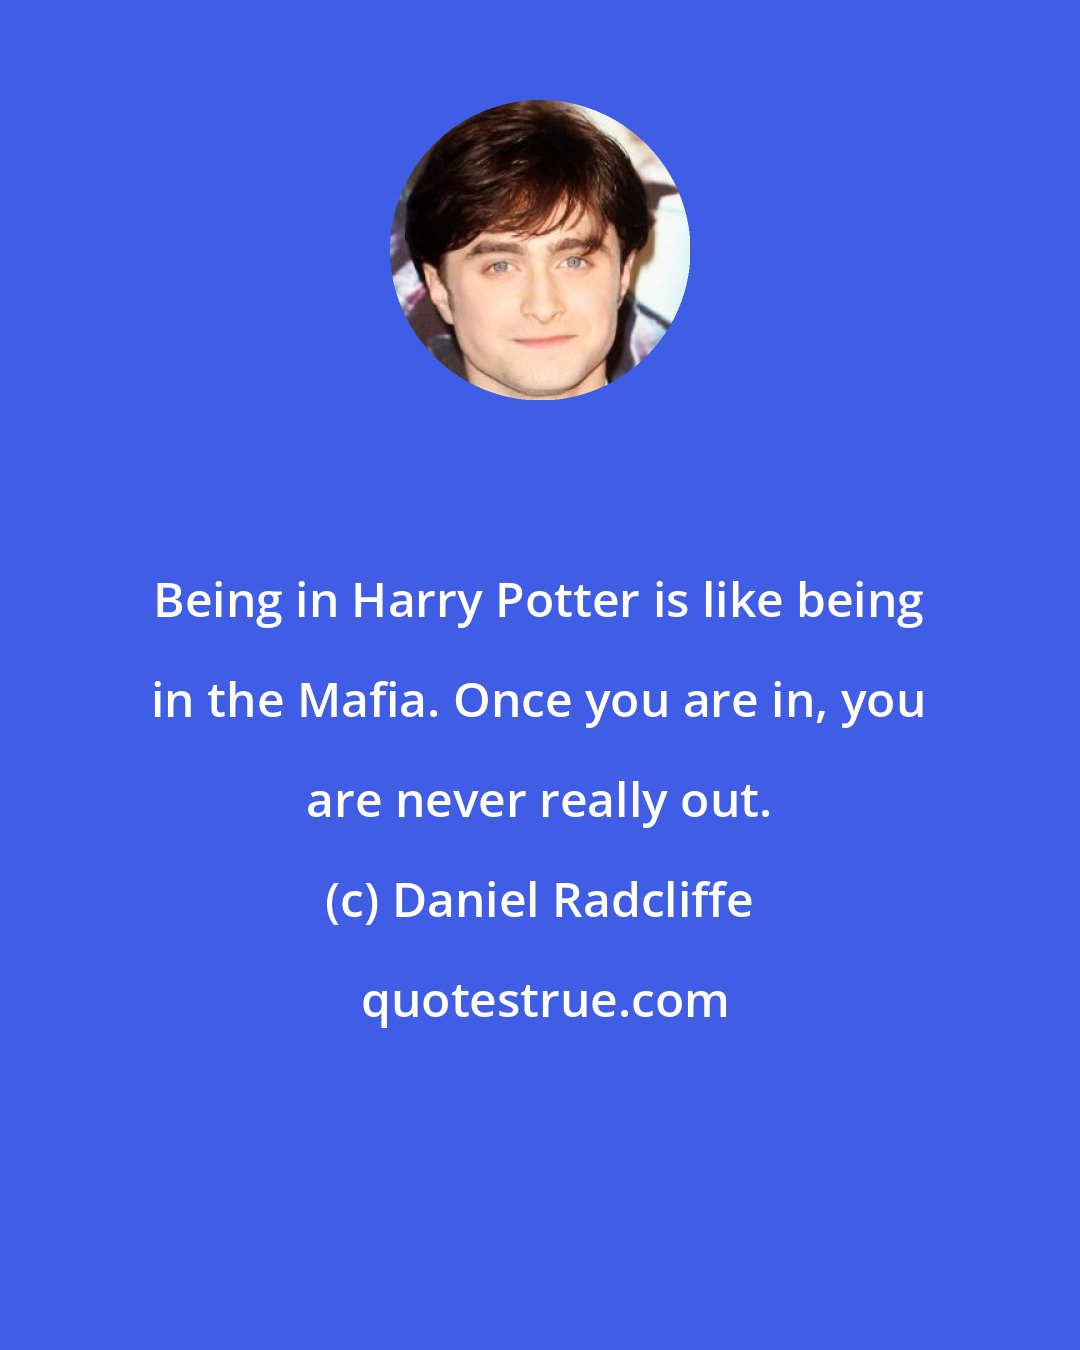 Daniel Radcliffe: Being in Harry Potter is like being in the Mafia. Once you are in, you are never really out.